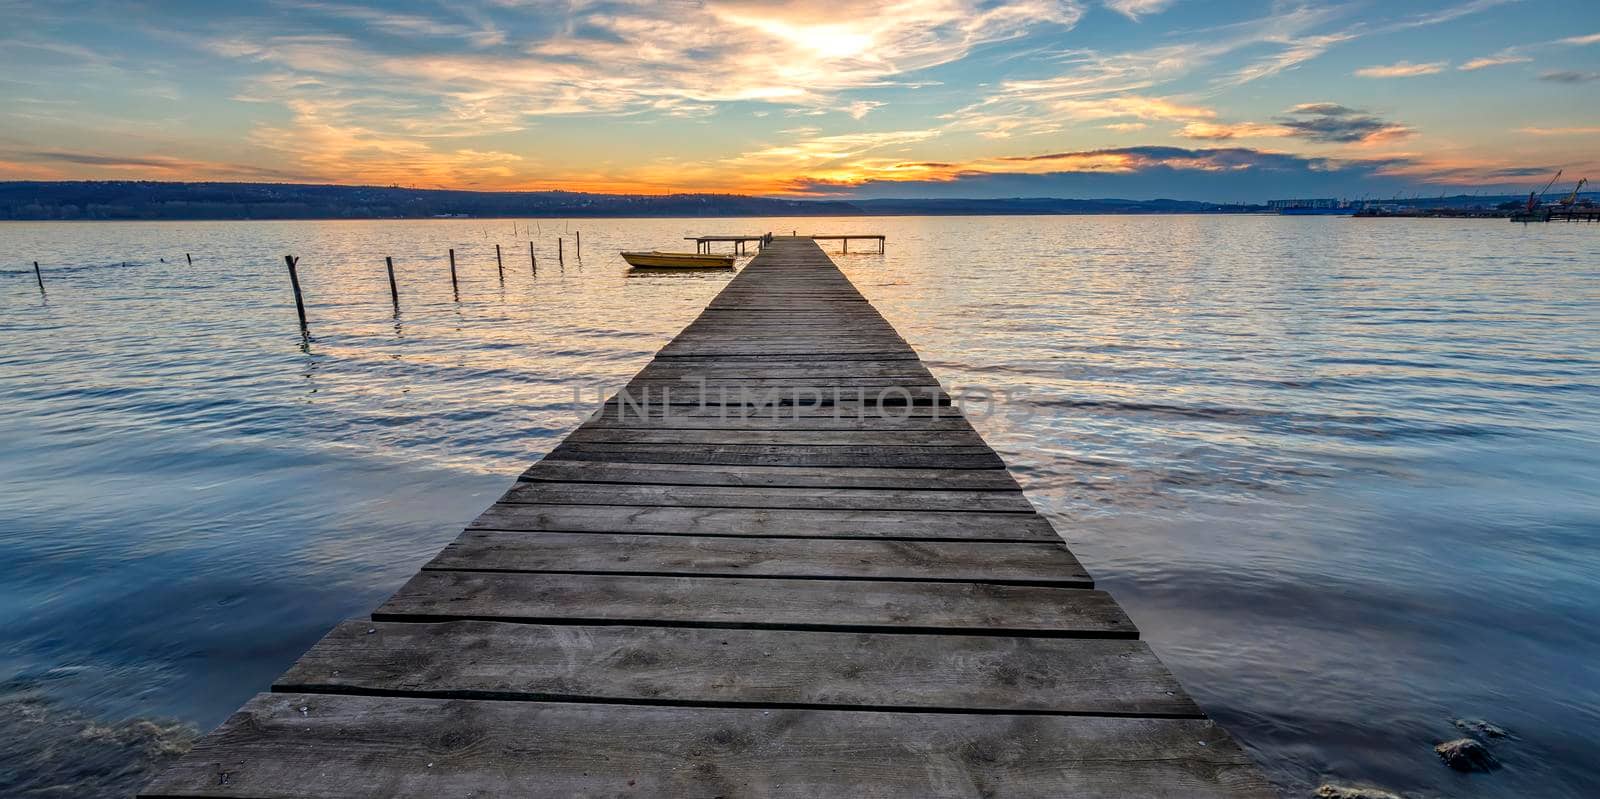 Scenic view of exciting twilight at the shore with a wooden pier and moored boat